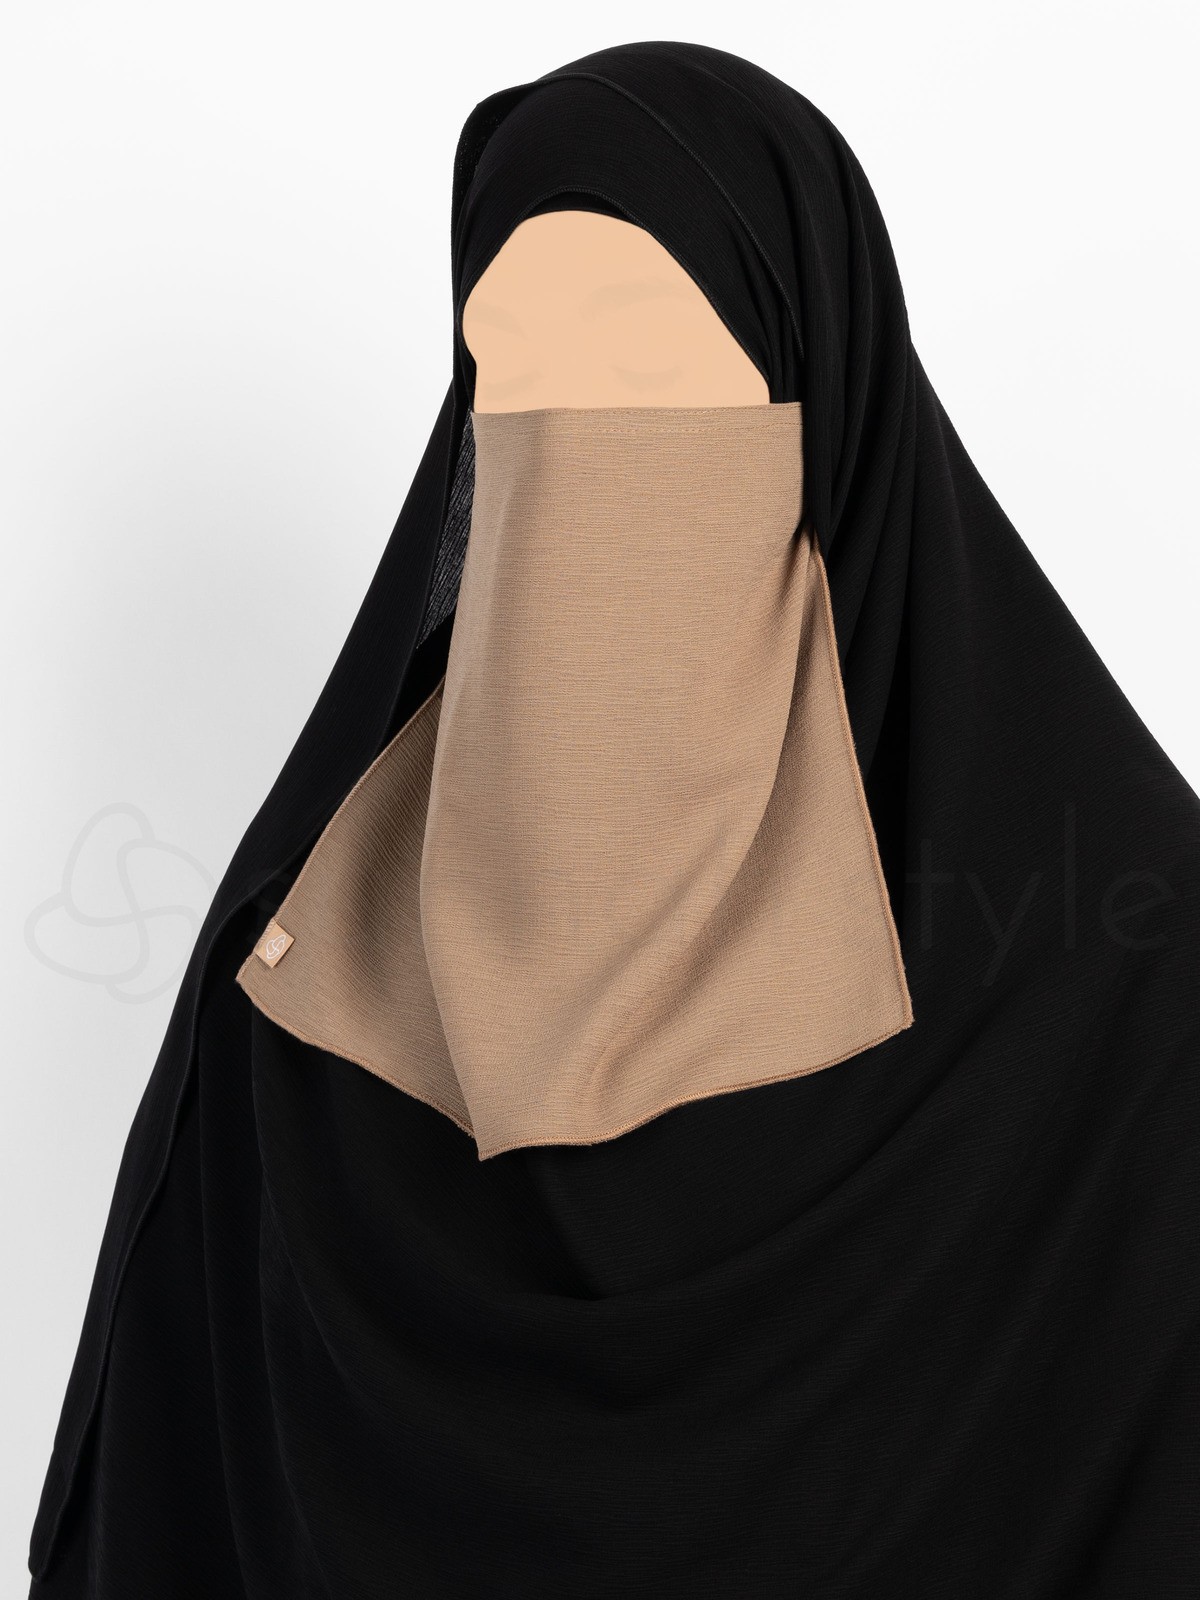 Sunnah Style - Brushed Half Niqab (Warm Taupe)